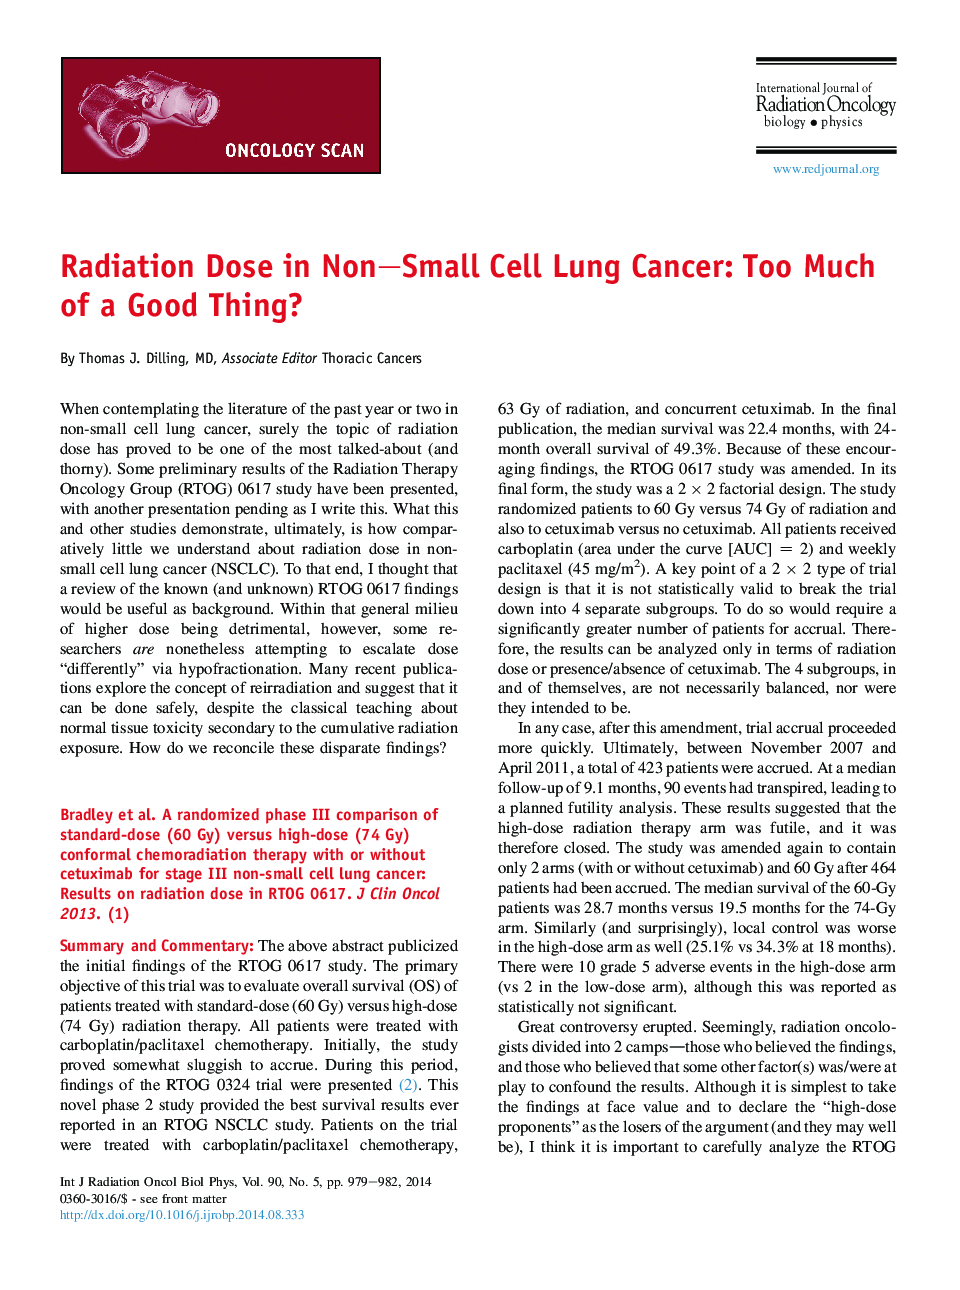 Radiation Dose in Non-Small Cell Lung Cancer: Too Much of a Good Thing?